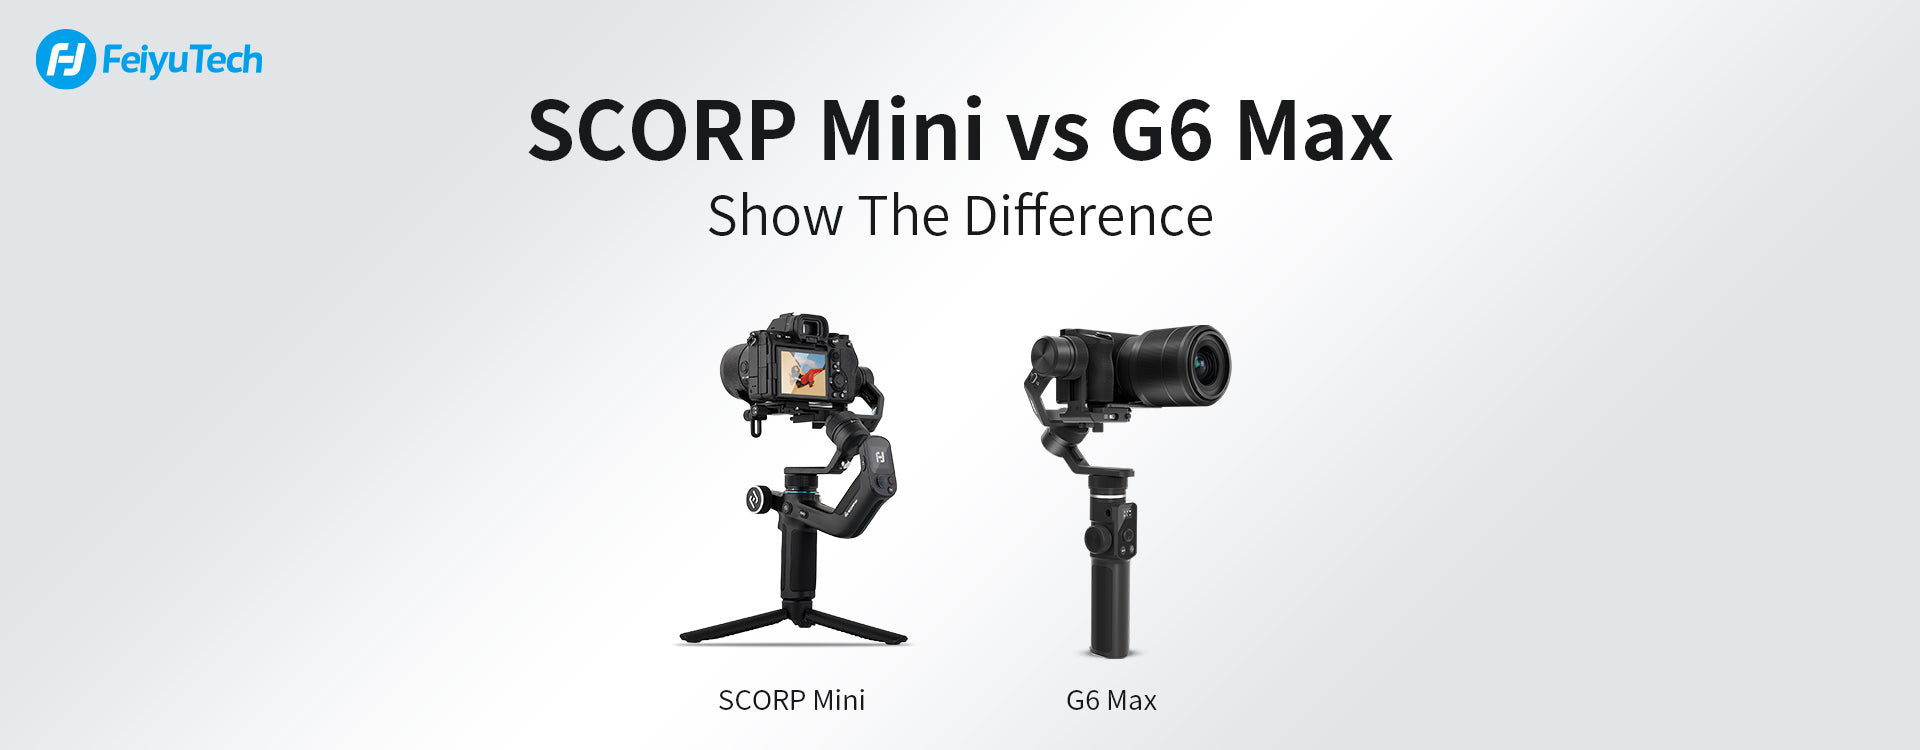 FeiyuTech Scorp mini vs g6 max whats the difference